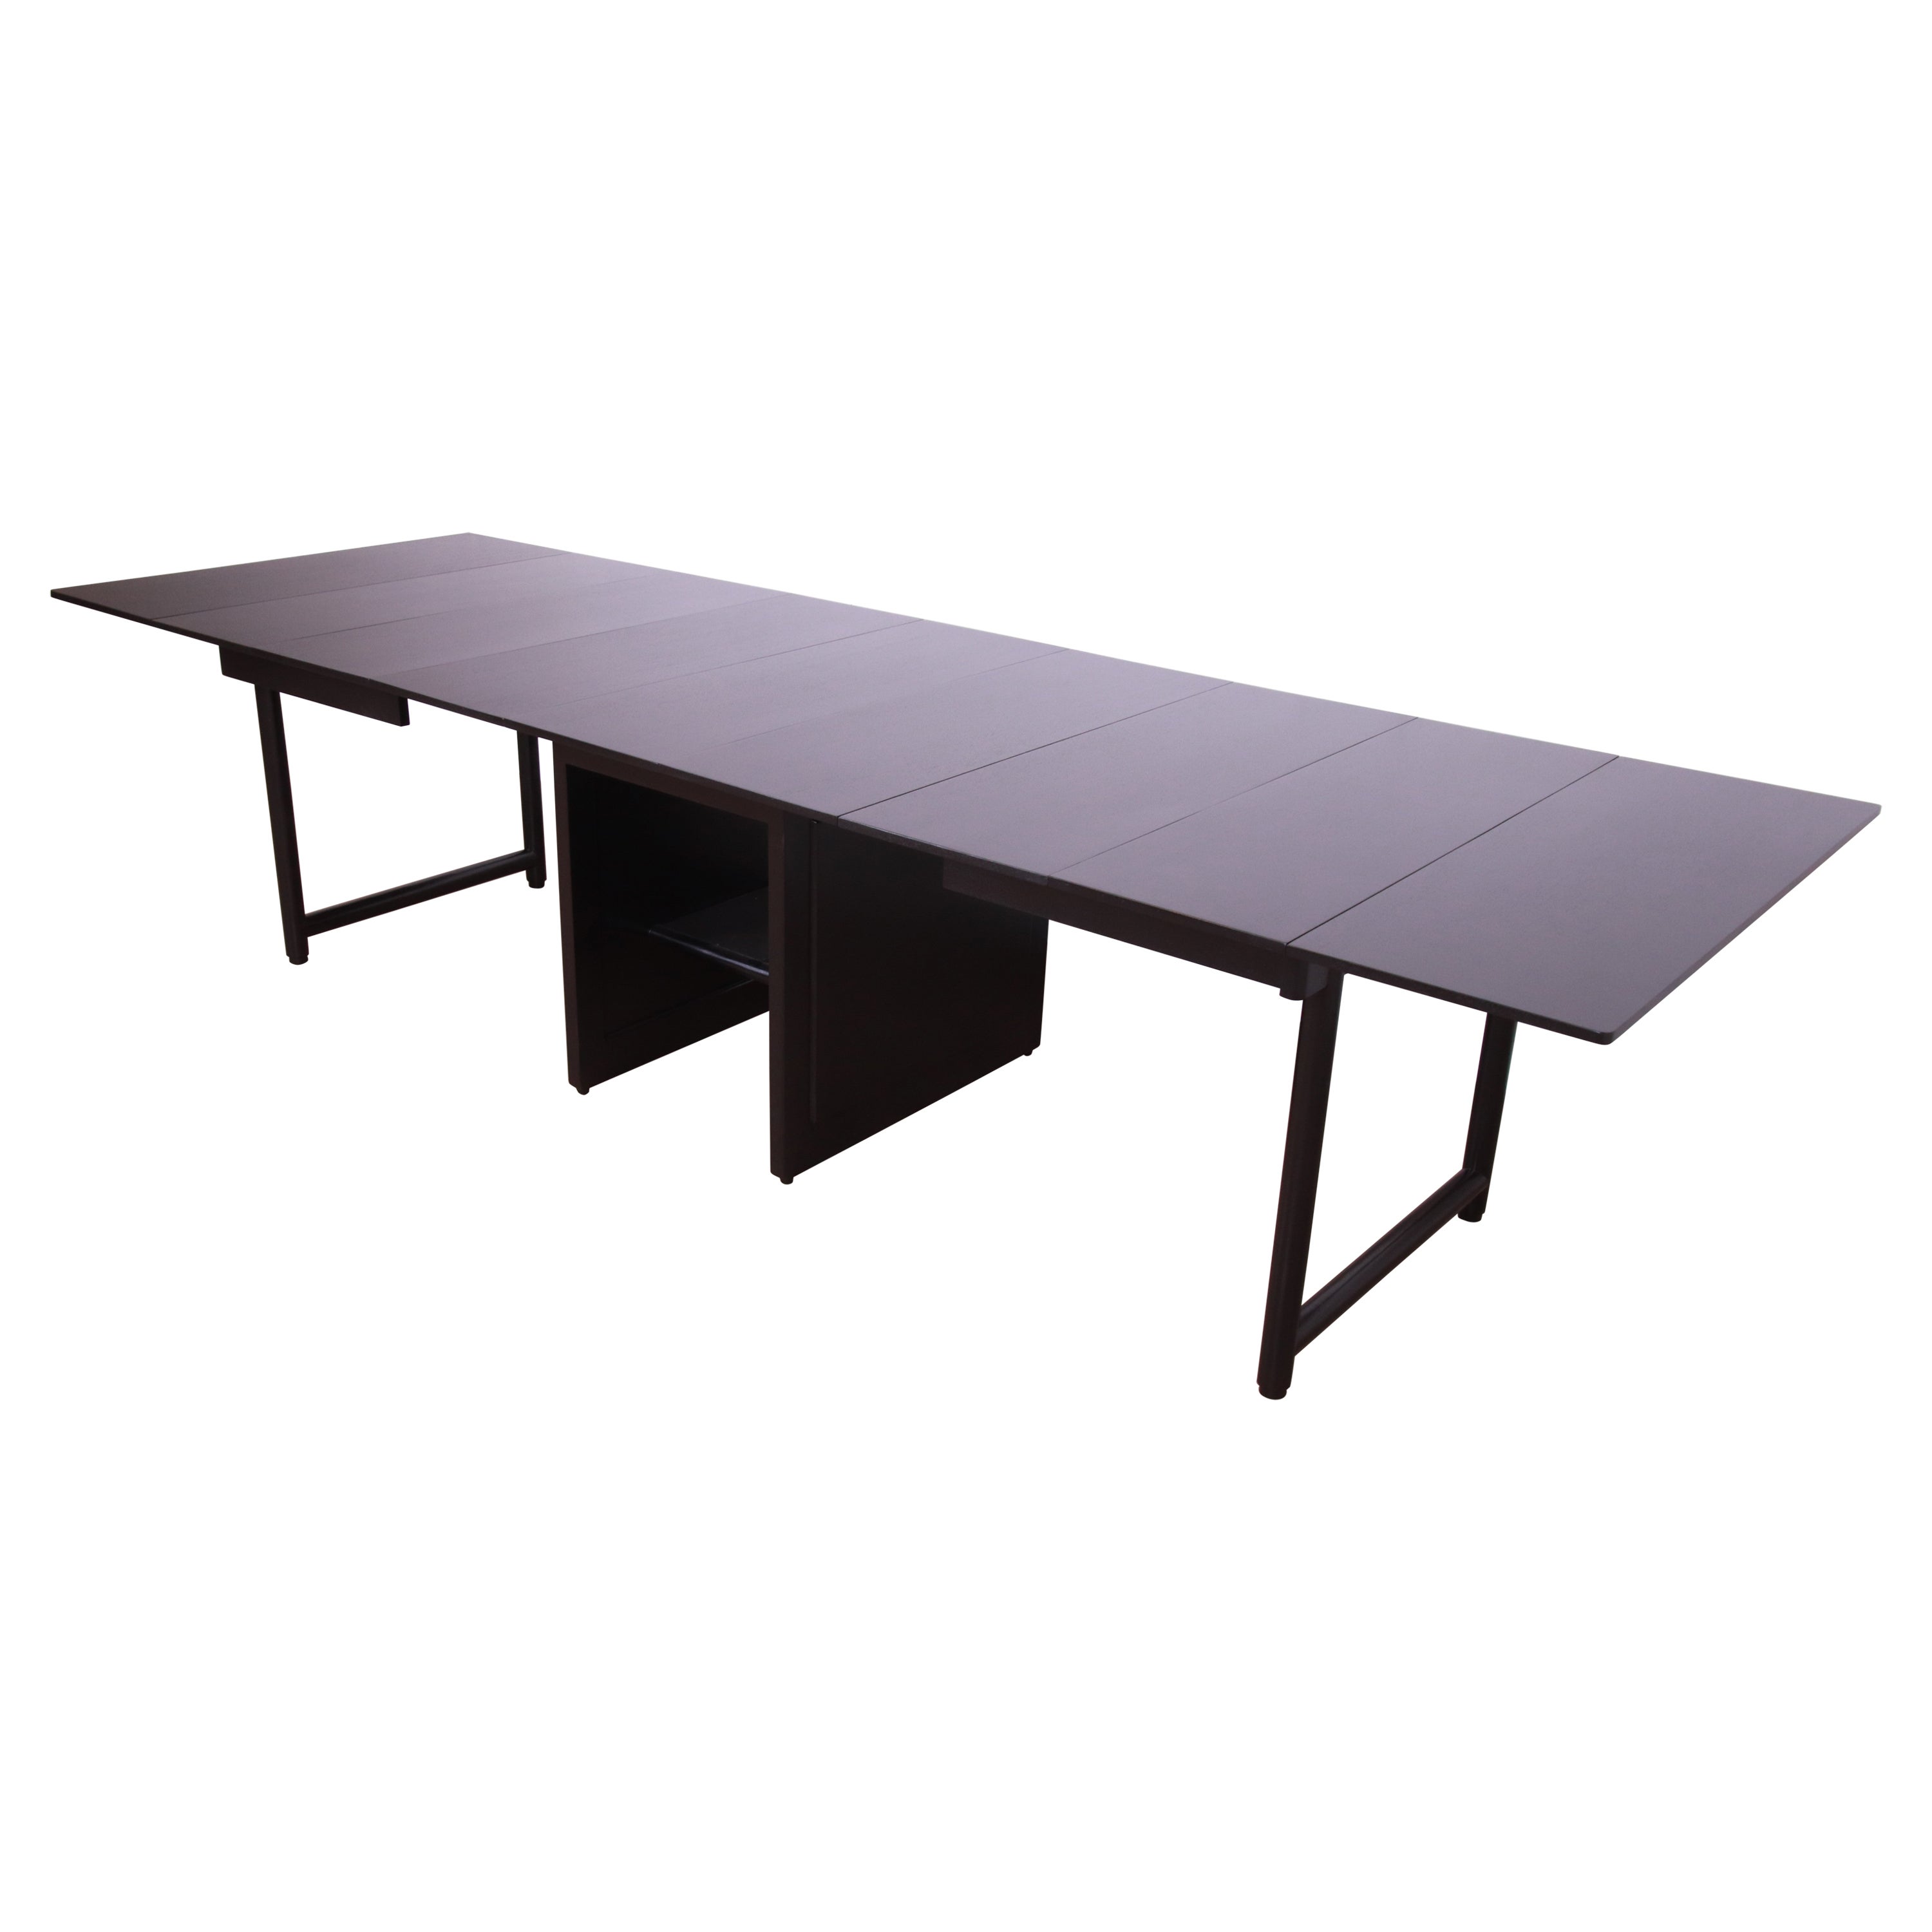 Edward Wormley for Dunbar Black Lacquered Extension Dining Table, Refinished